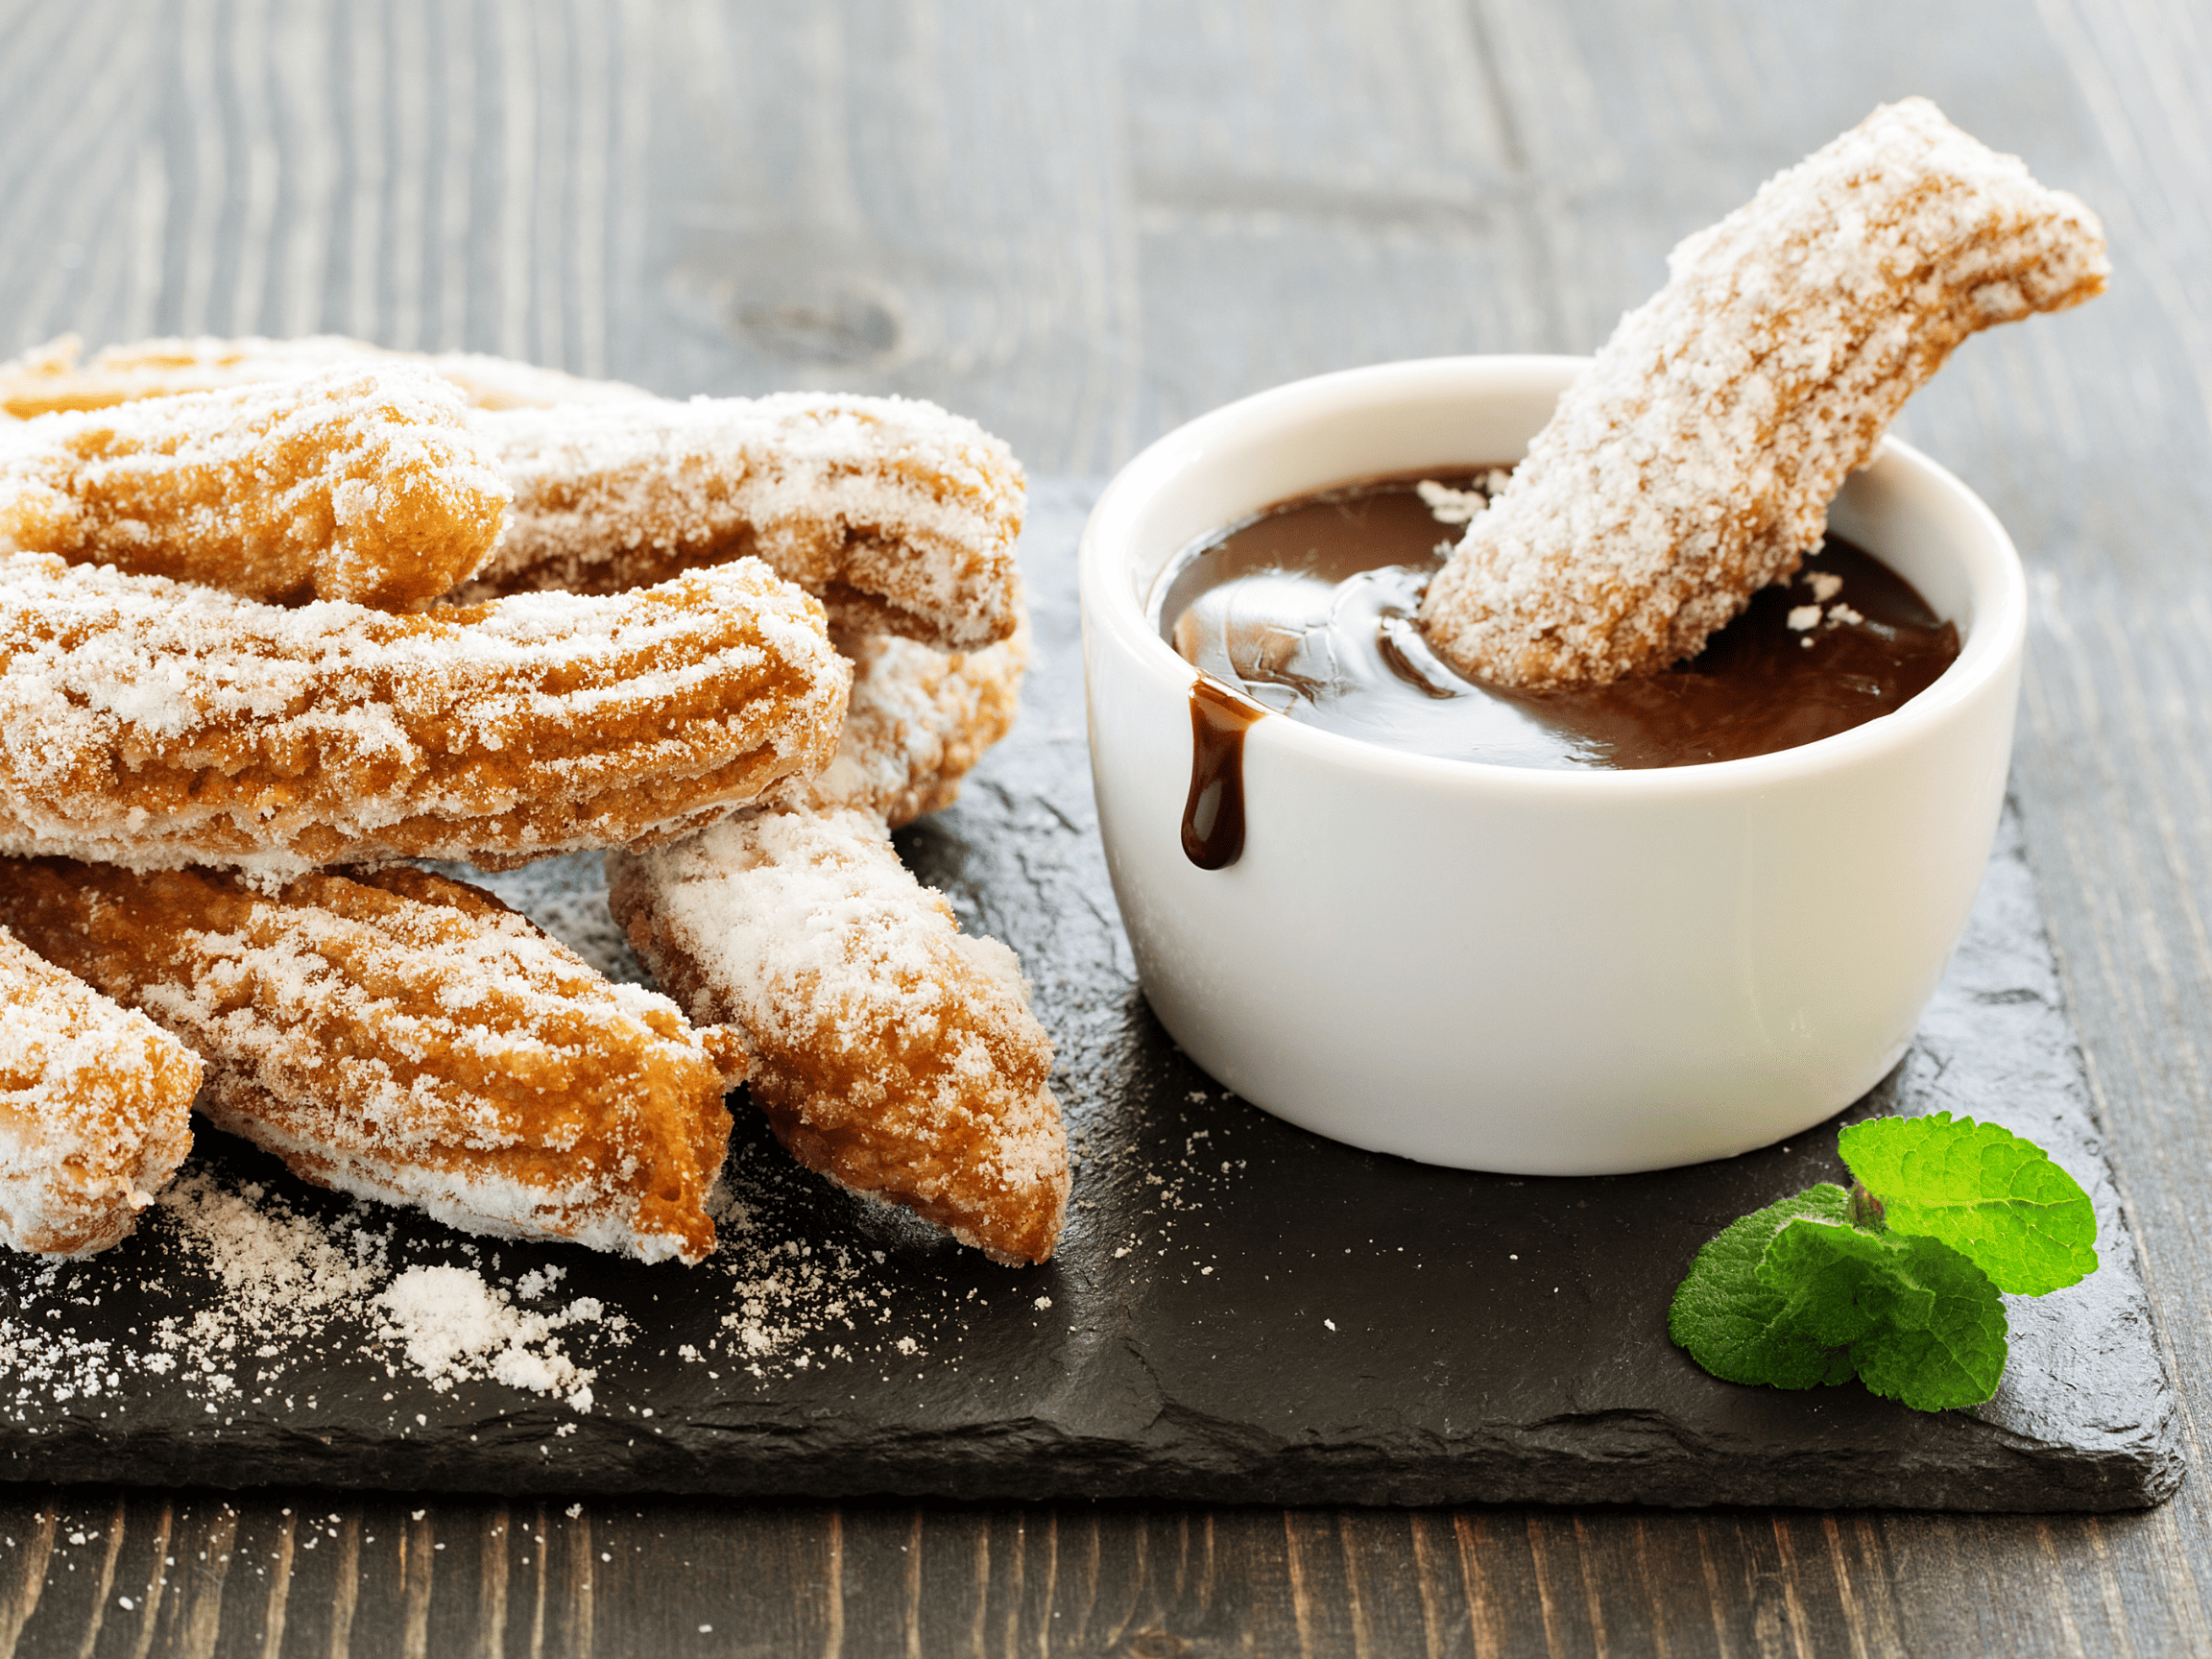 Fresh churros being dipped in chocolate sauce.